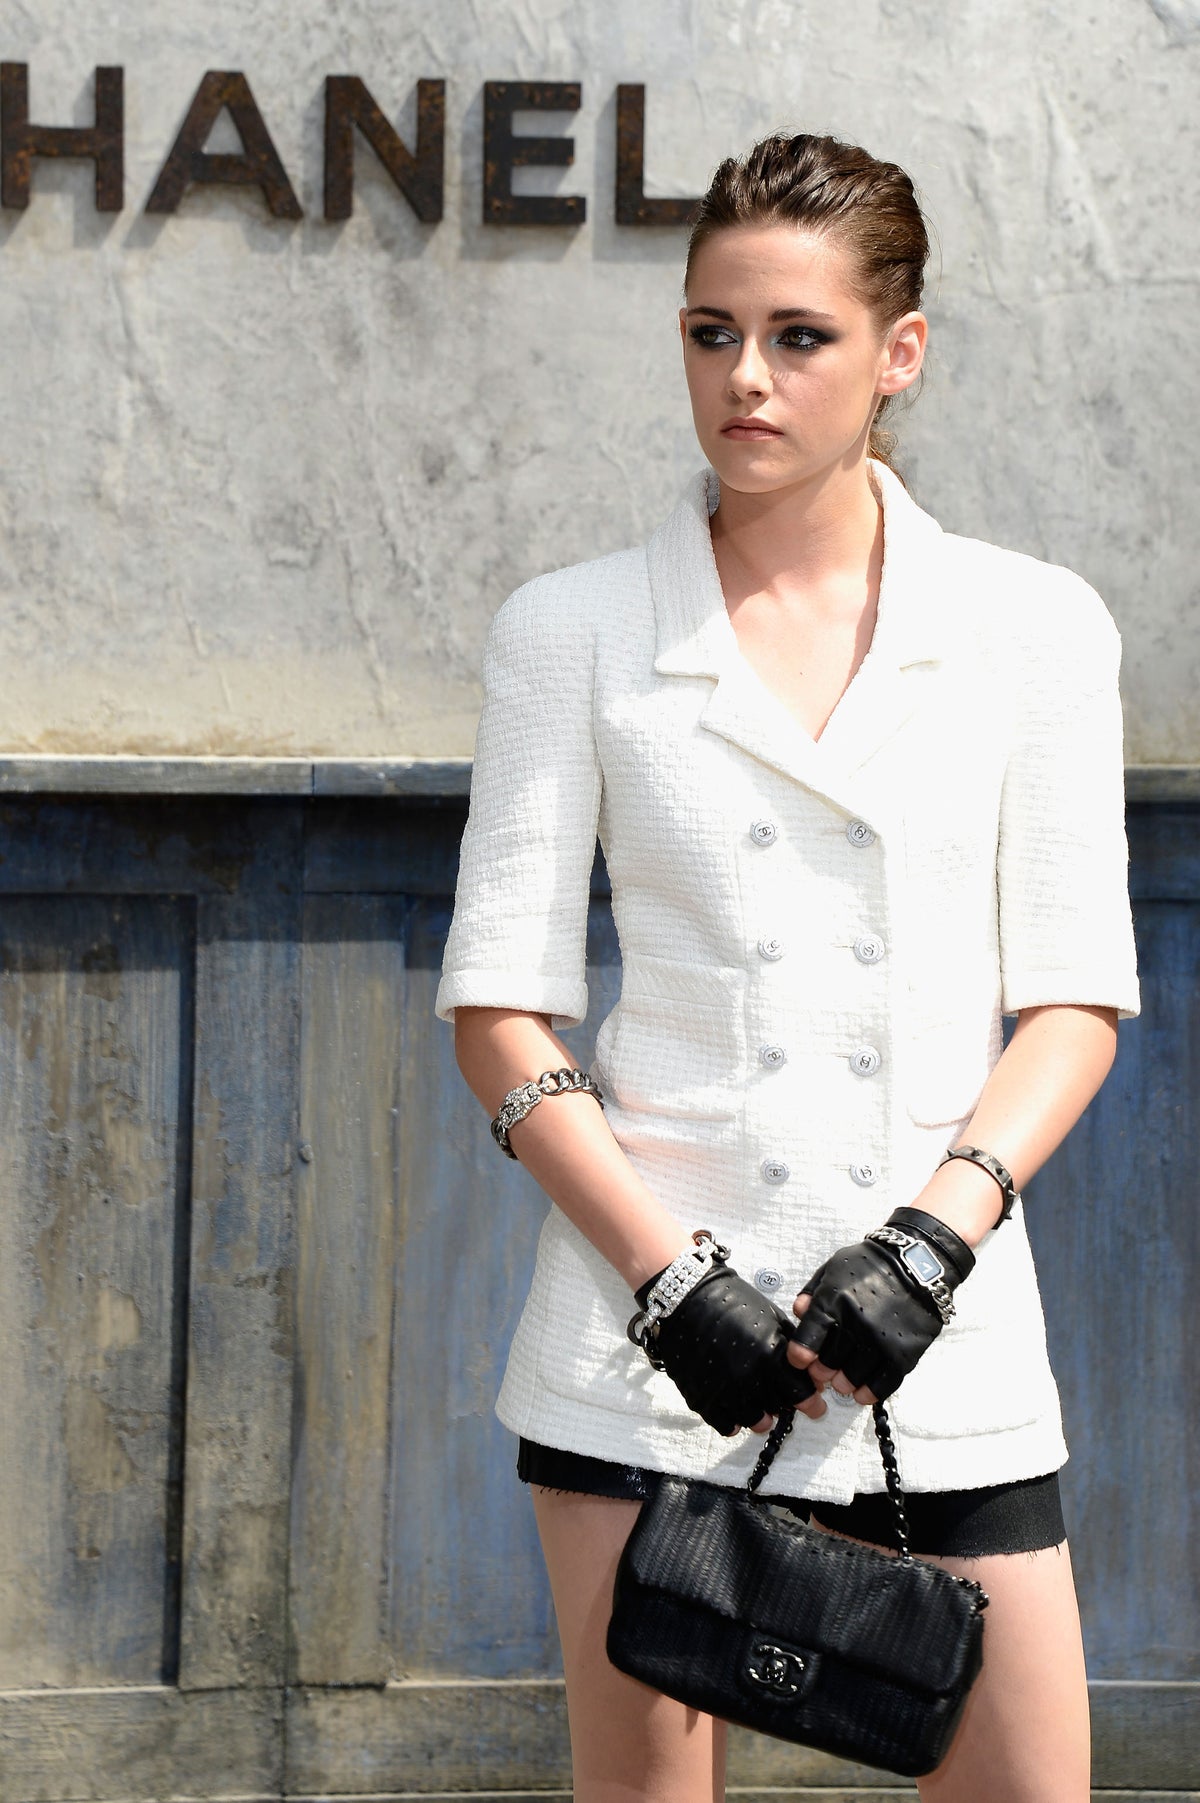 Stewart named the new face of Chanel | The Independent | The